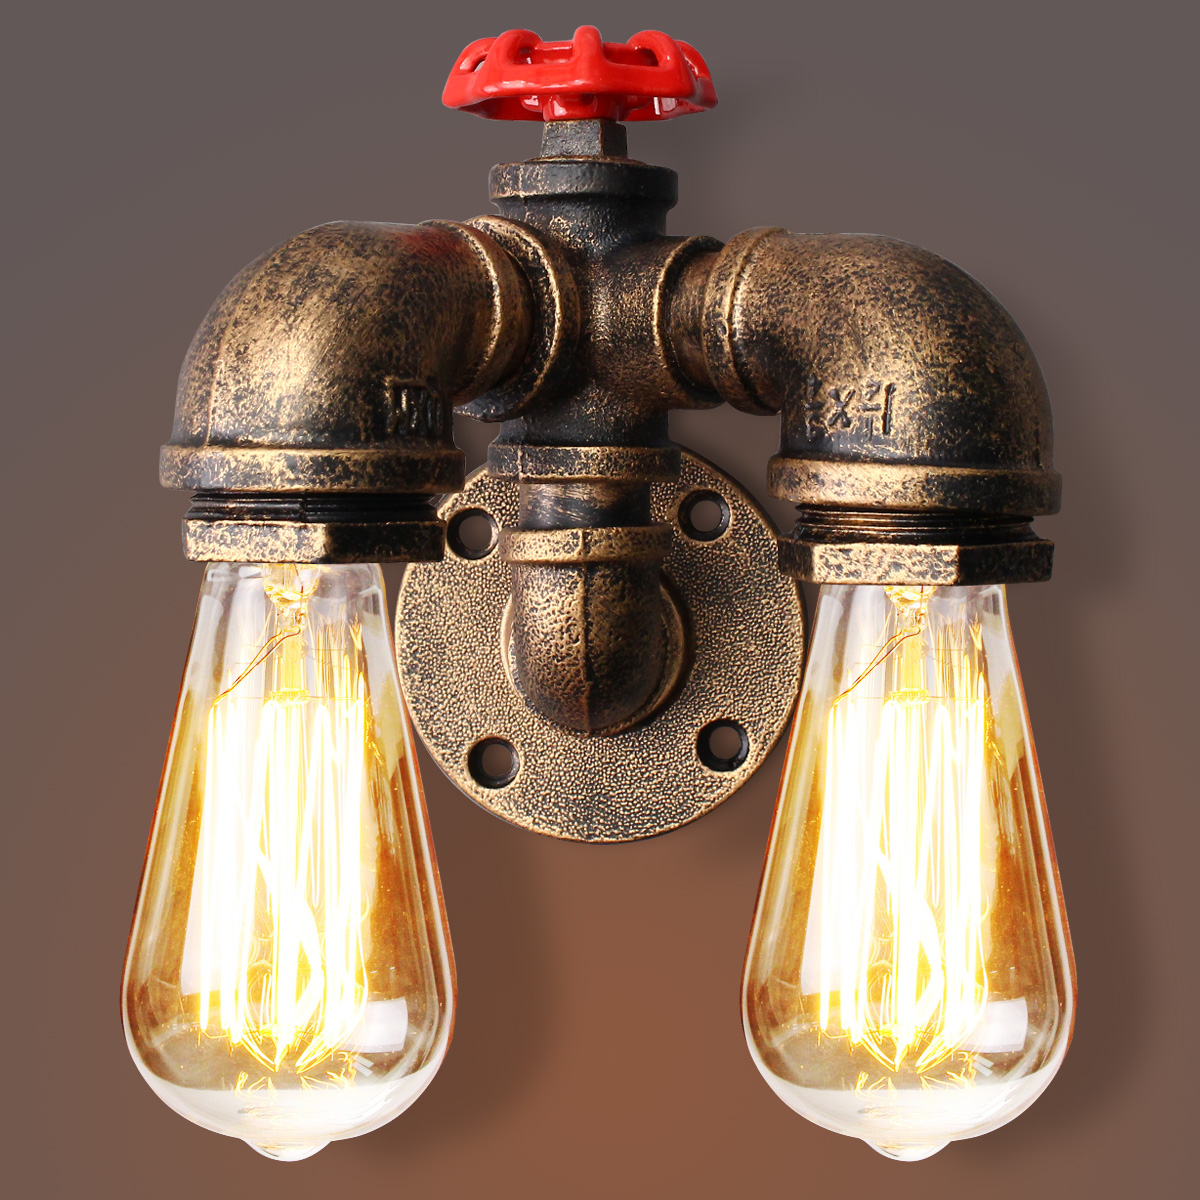 ZMH Vintage Wall Light Indoor Wood and Glass Retro Wall lamp E27 Industrial Wall Lighting Rustic Lamp for Hallway Country Bedroom Living Room Dining Table 